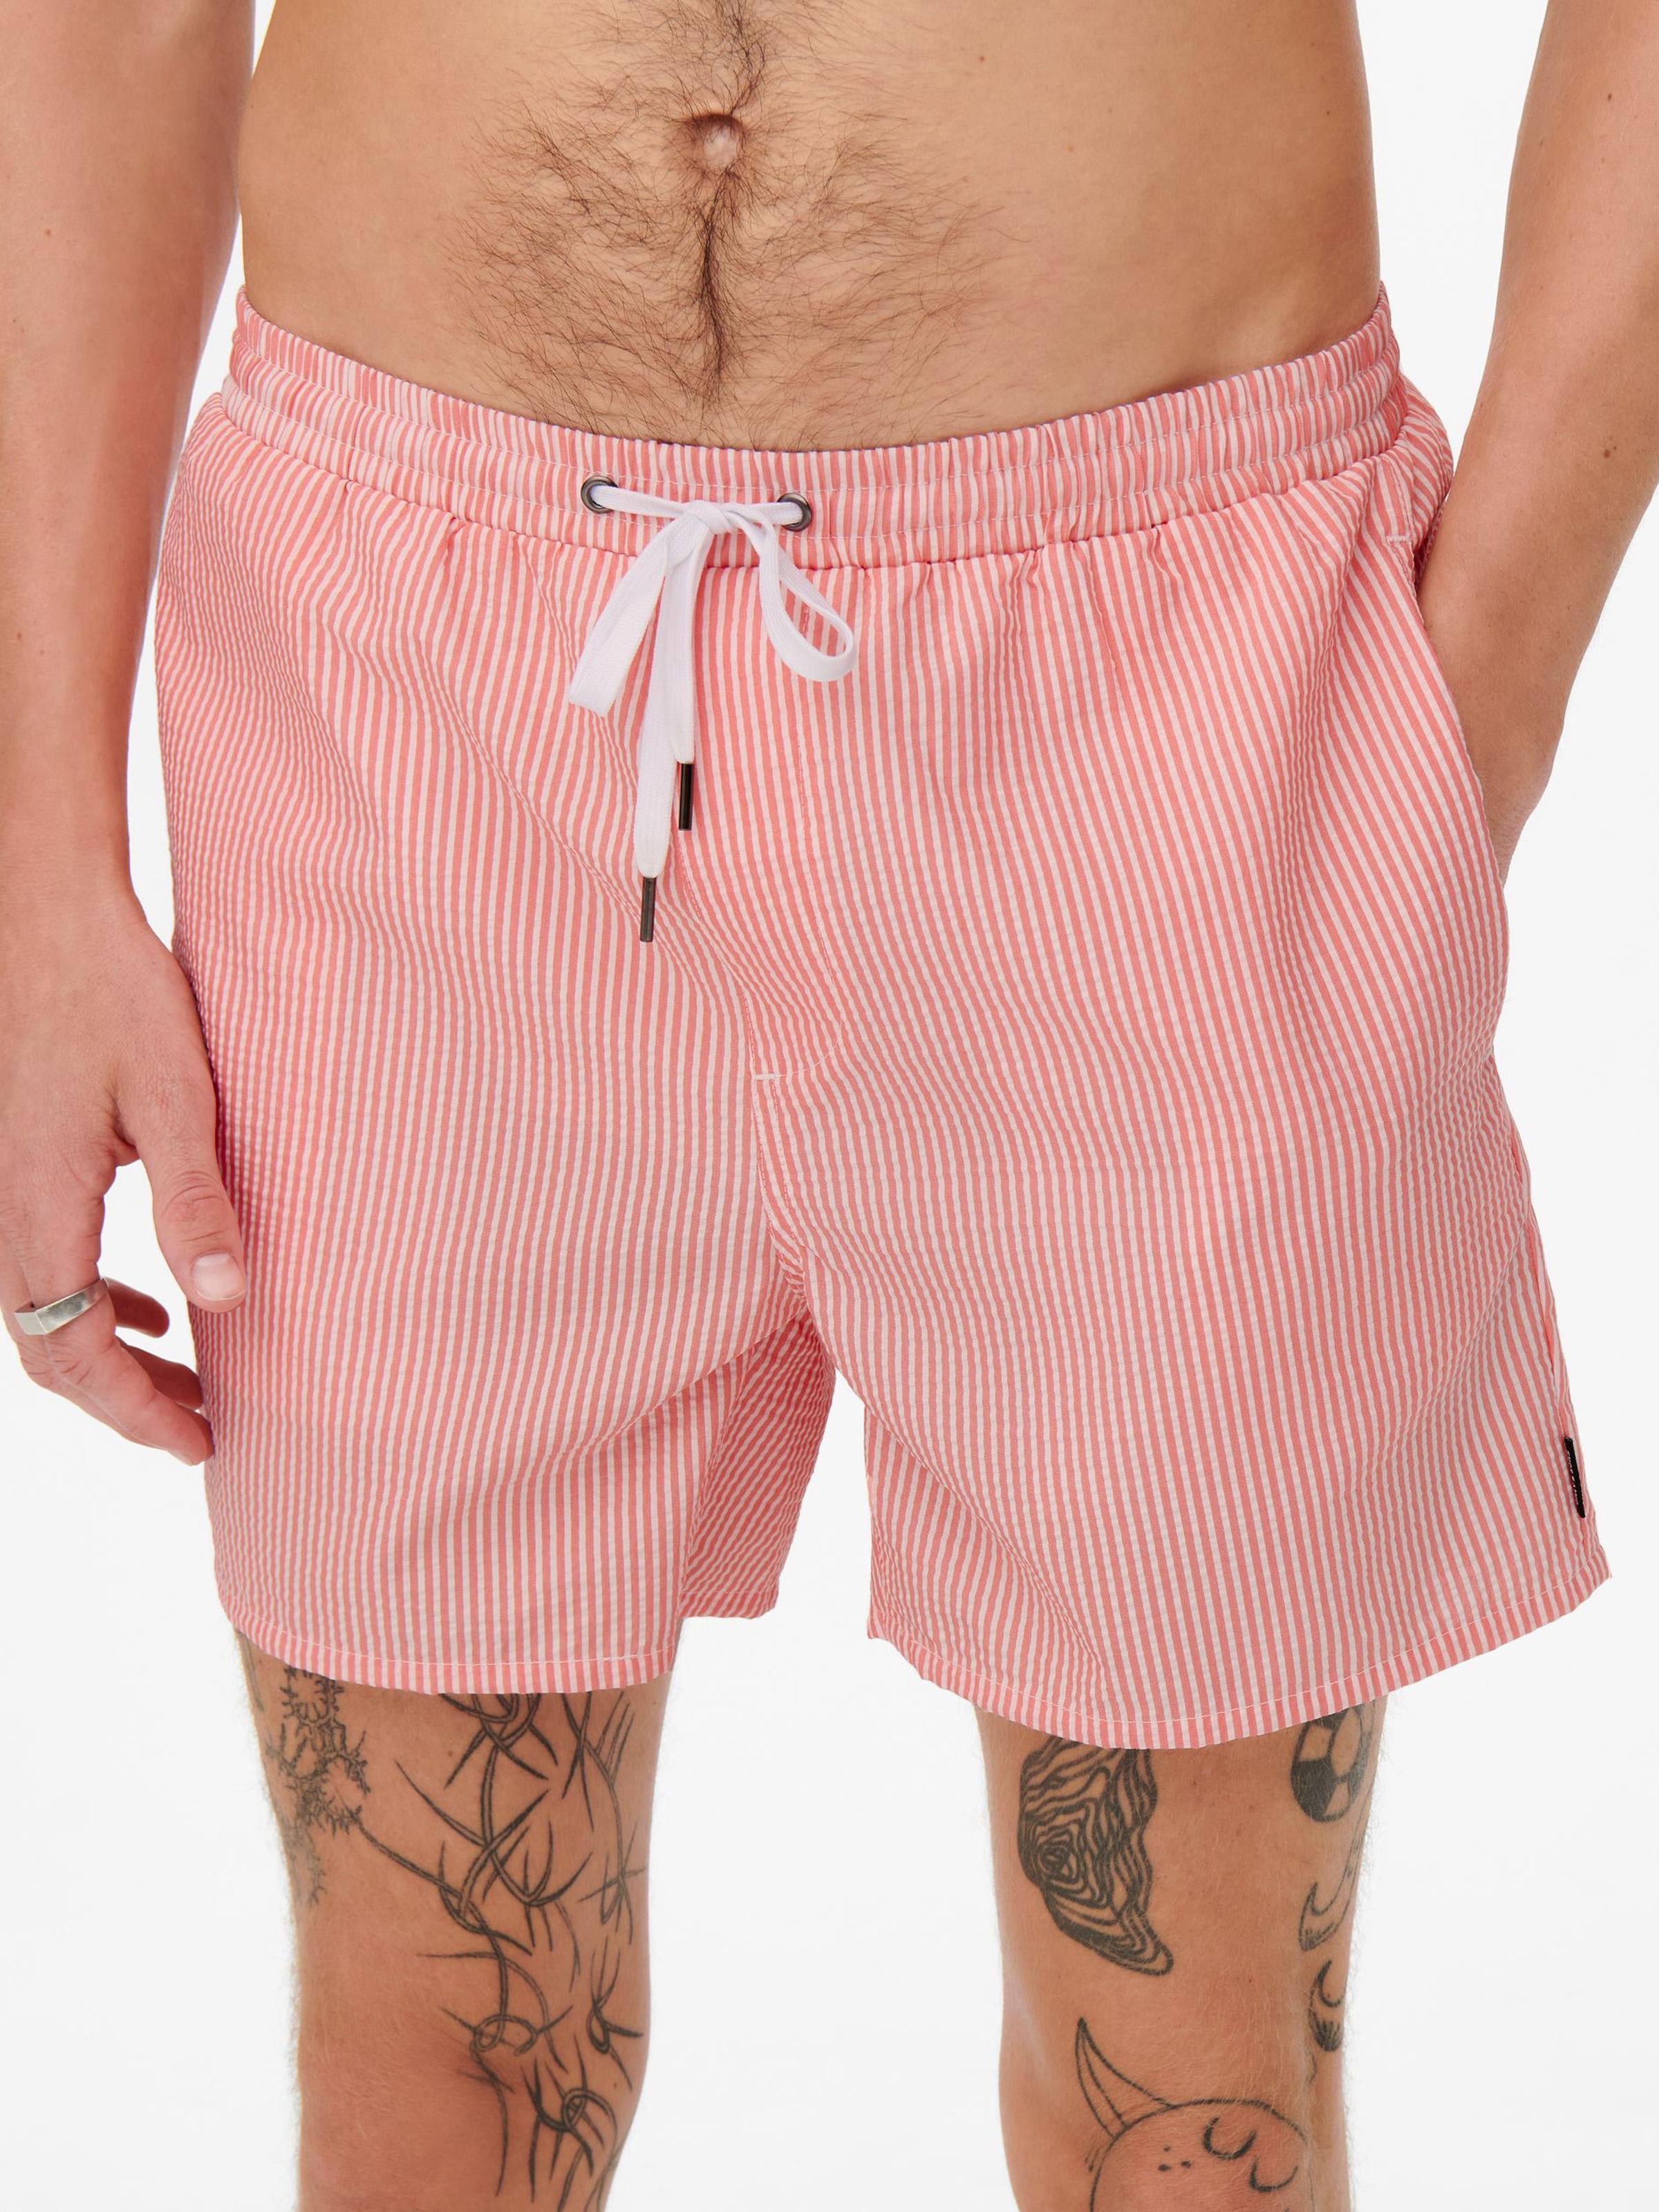 Männer Bademode Only & Sons Badeshorts 'Ted' in Altrosa, Weiß - GH30936